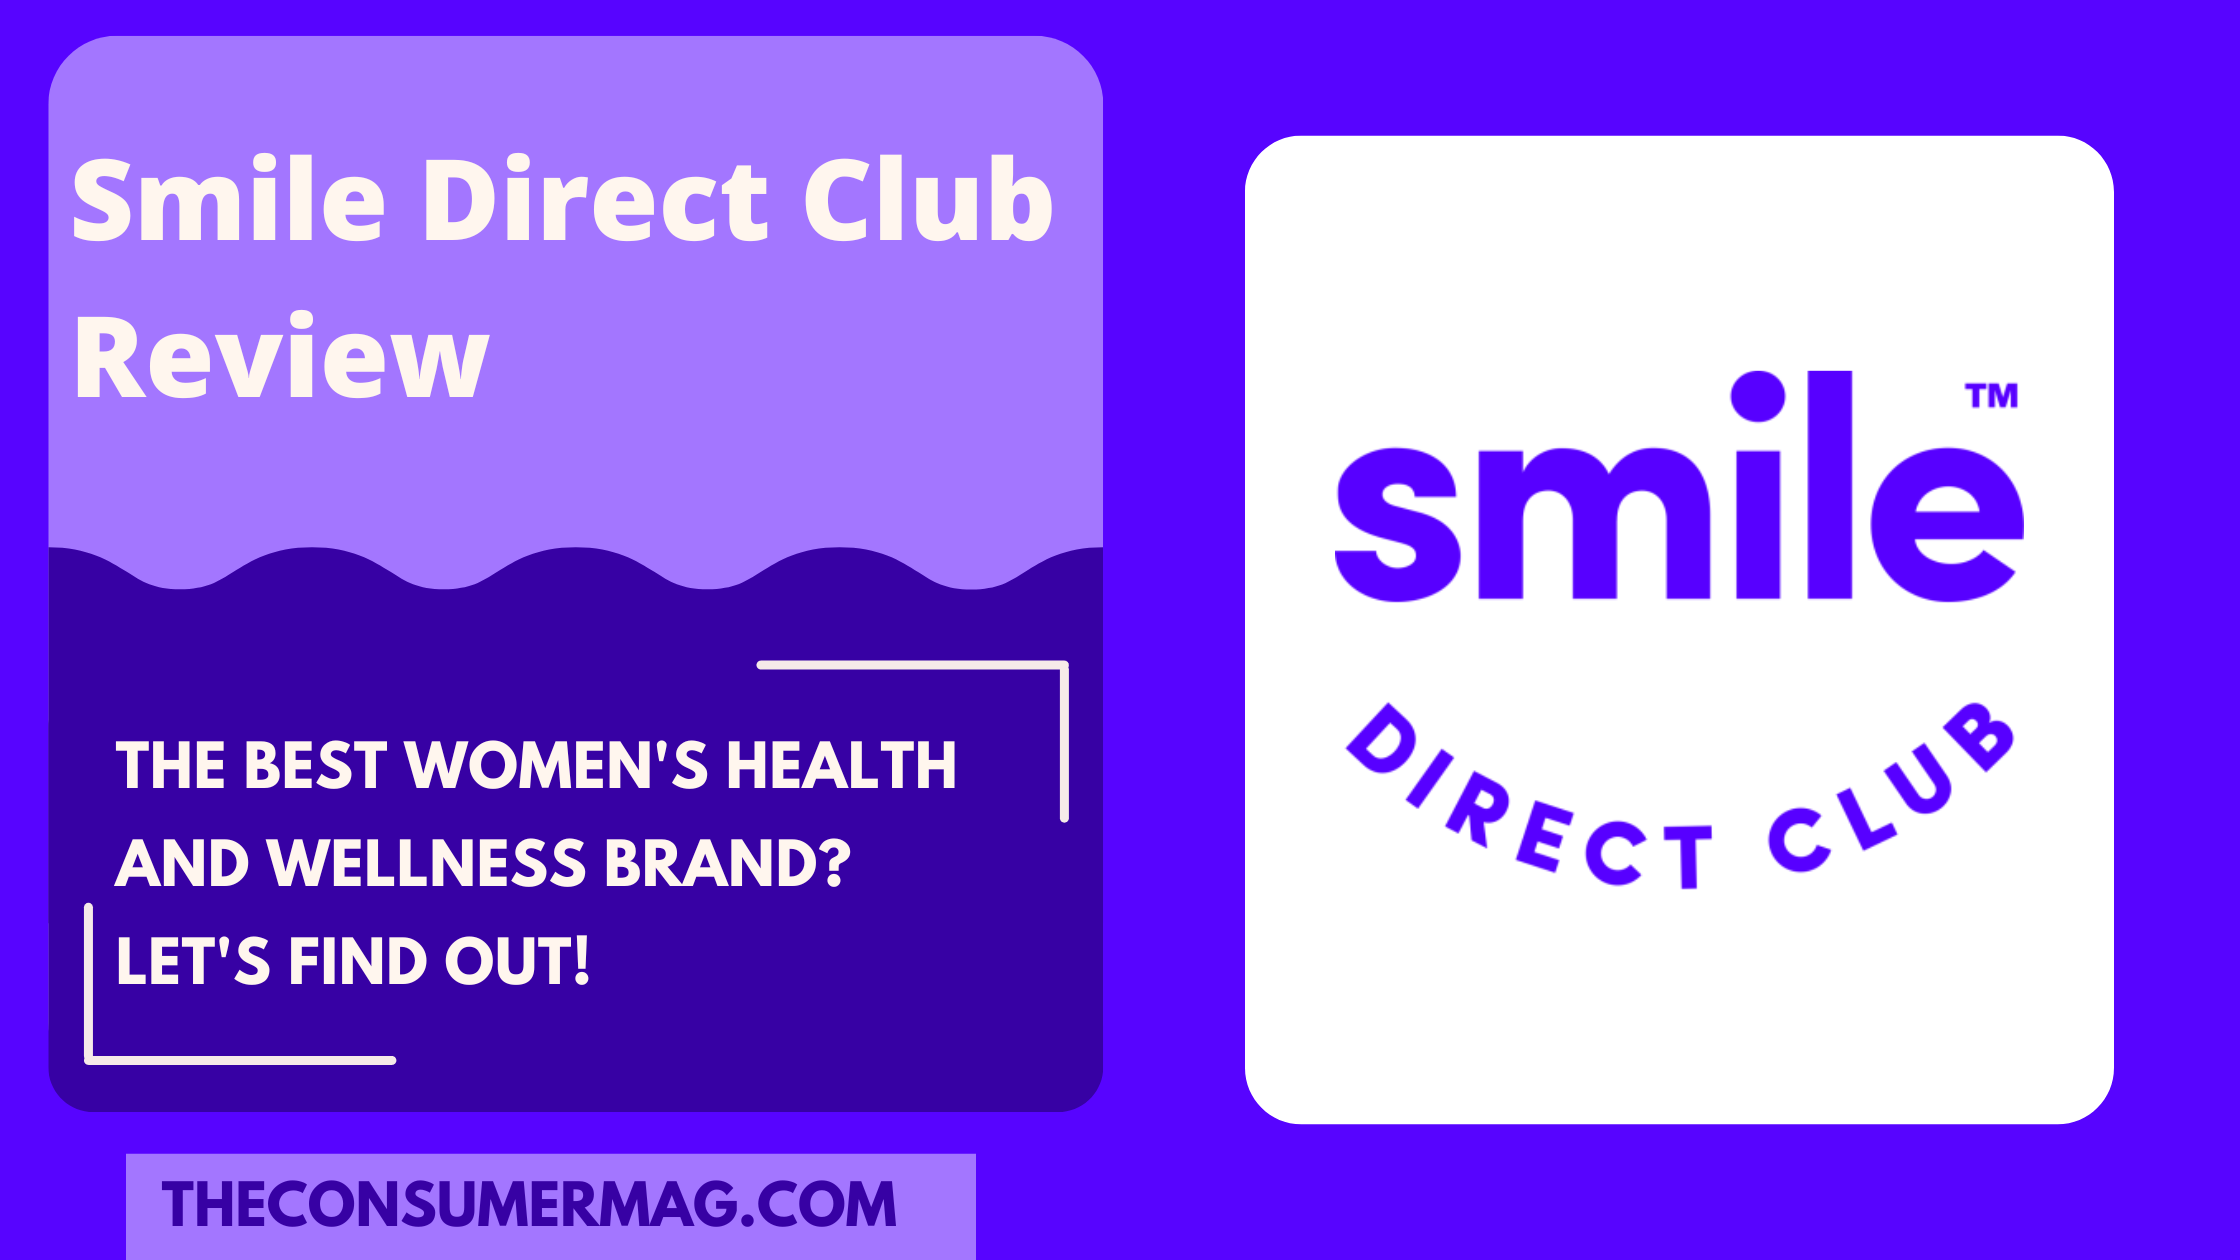 Smile Direct Club featured image